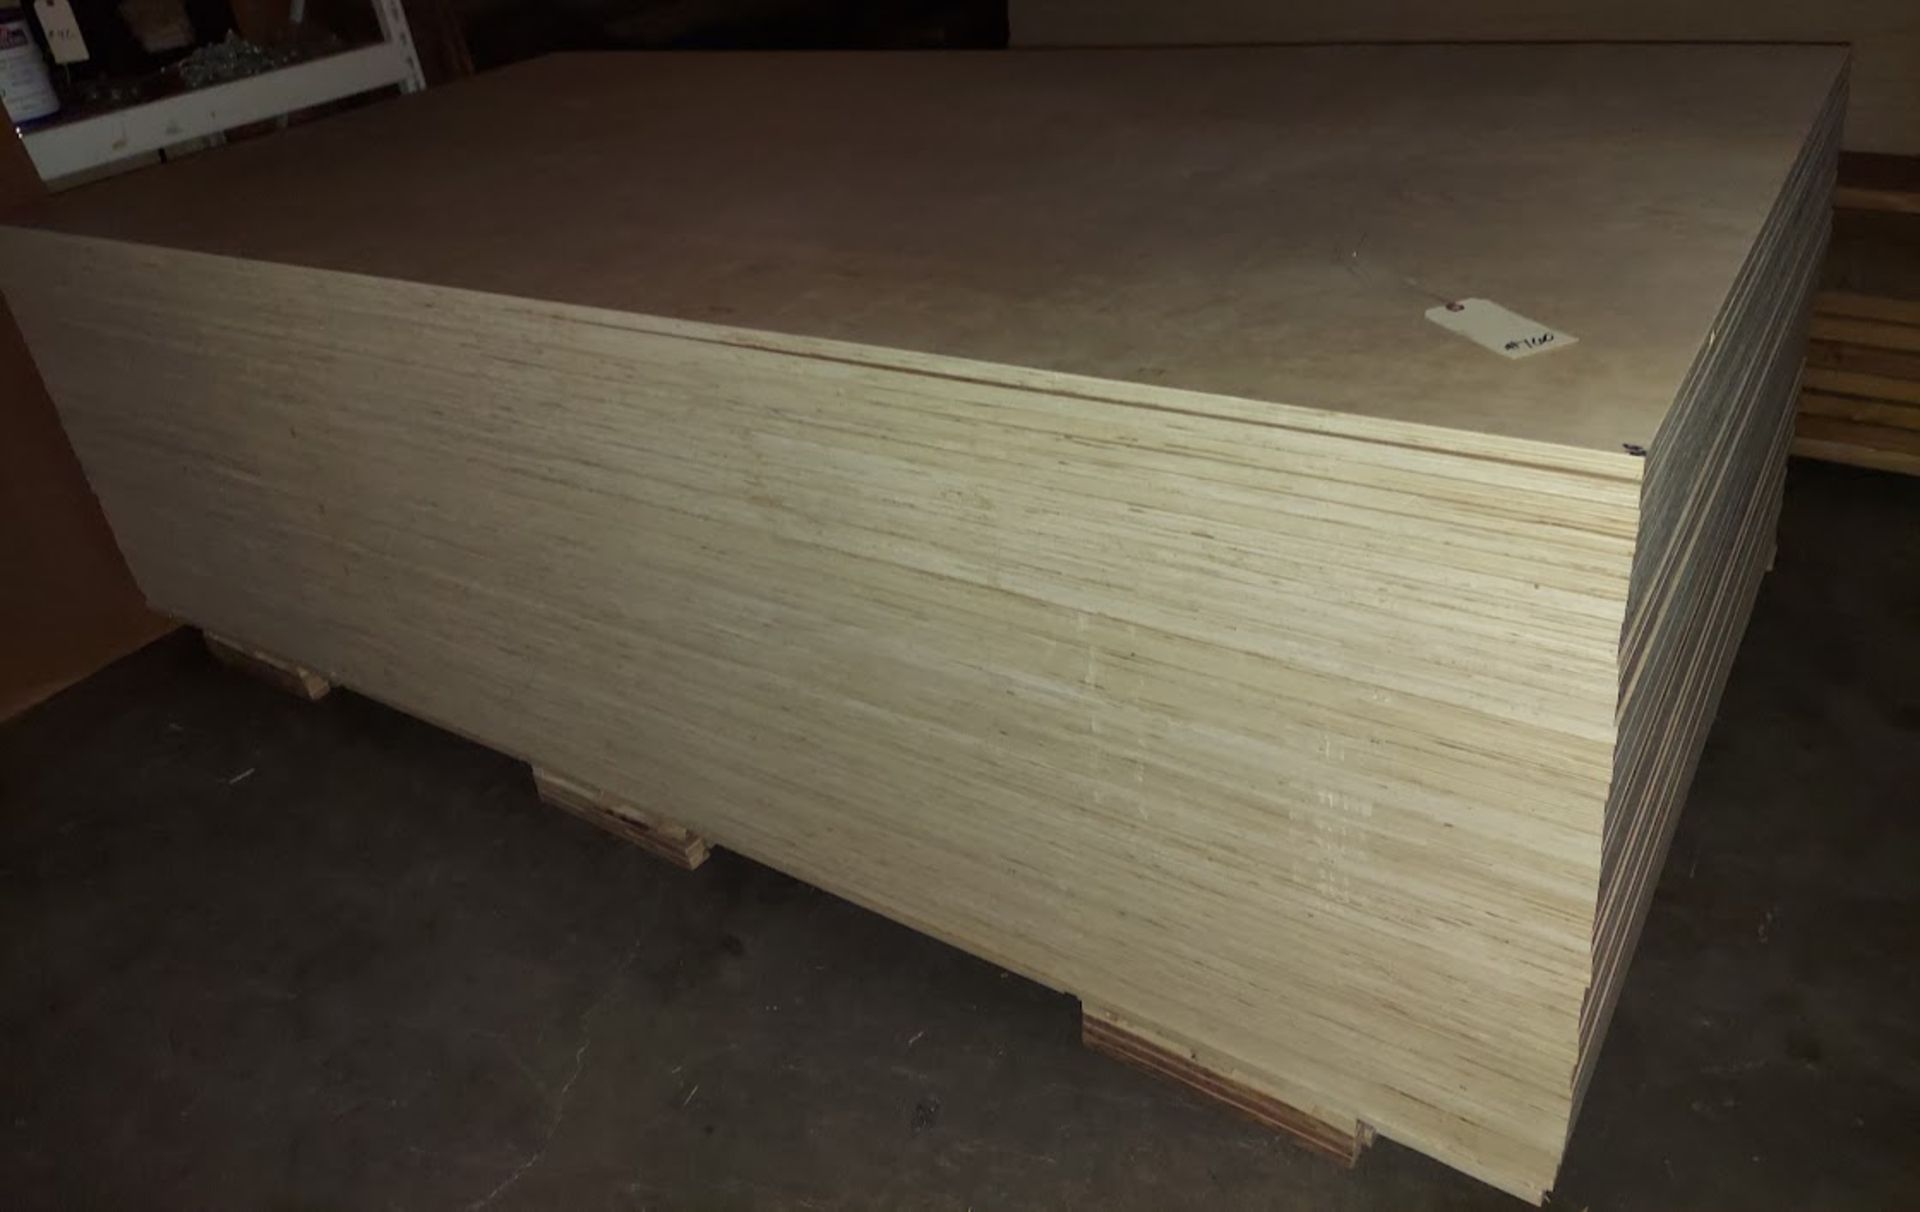 34 Sheets of 18mm Red Birch Plywood 4' x 8' Sheets